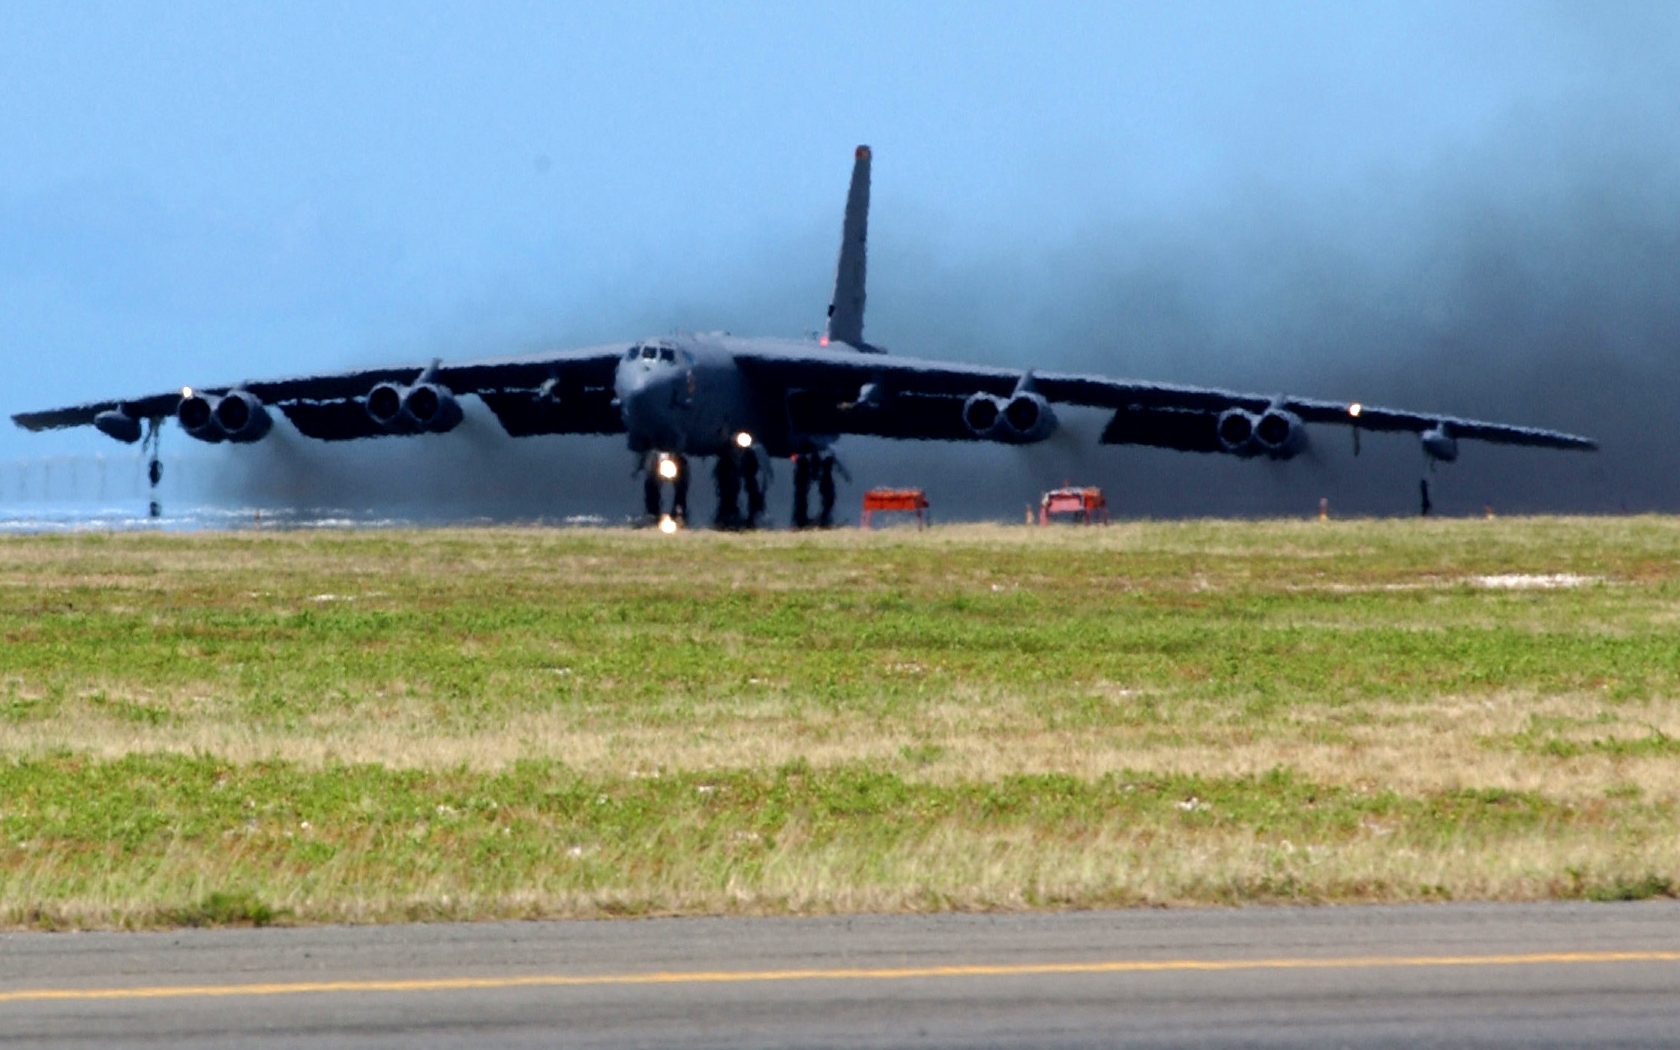 Download full size B-52 Stratofortress Military Airplanes wallpaper / 1680x1050